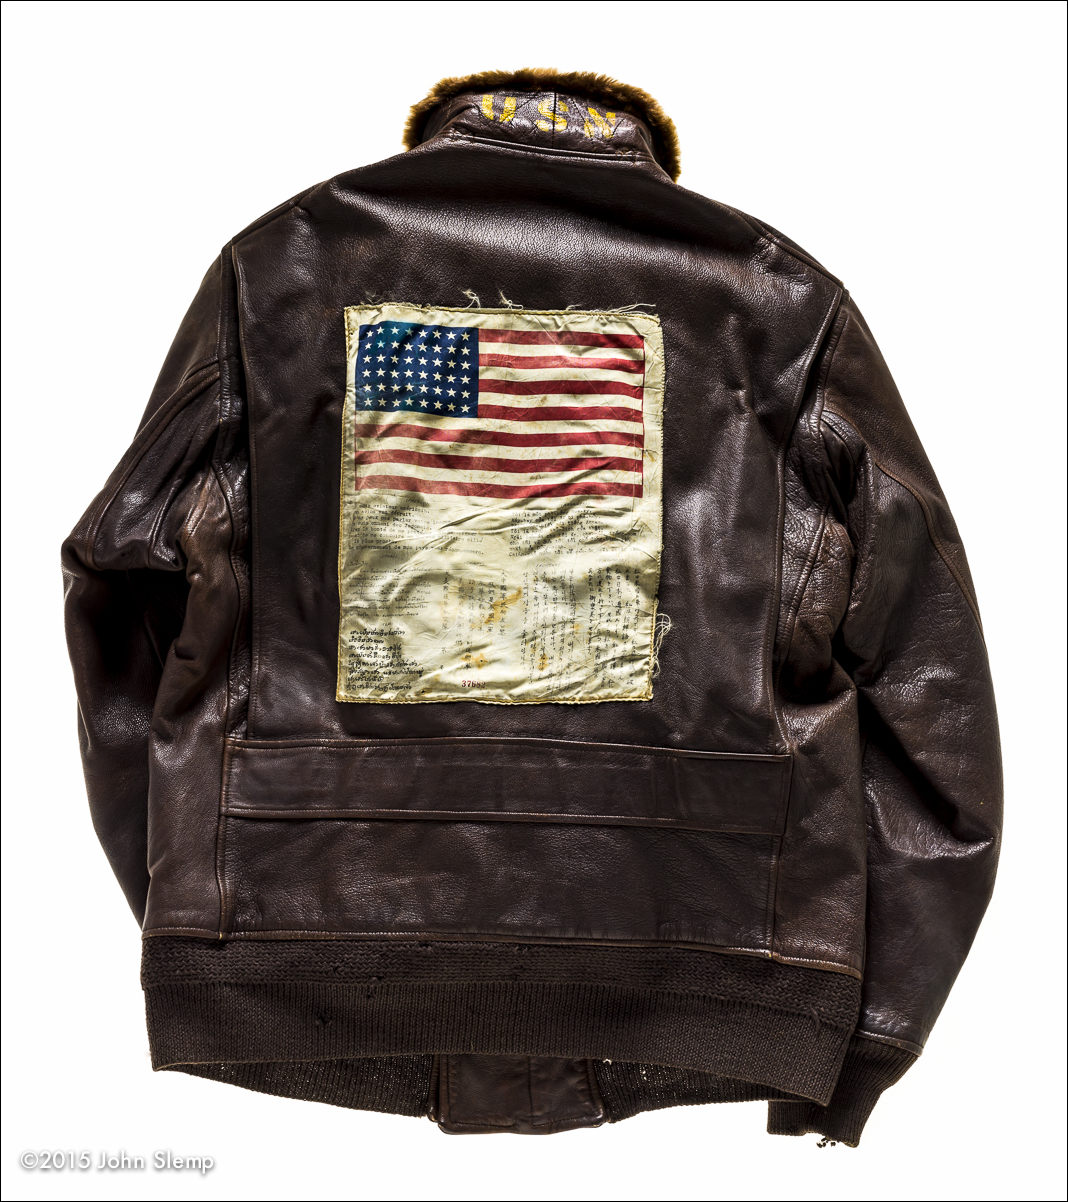  The "blood chit" on the back of the jacket was a billboard, written in many of the SE Asian languages, basically advising locals that the wearer was an American serviceman. If aided with food and shelter, and safely returned to allied lines, there would be a reward for their efforts.  Notice the "USN" on the collar.  This G-1 belongs to the National Naval Aviation Museum collection in Pensacola, Florida. 